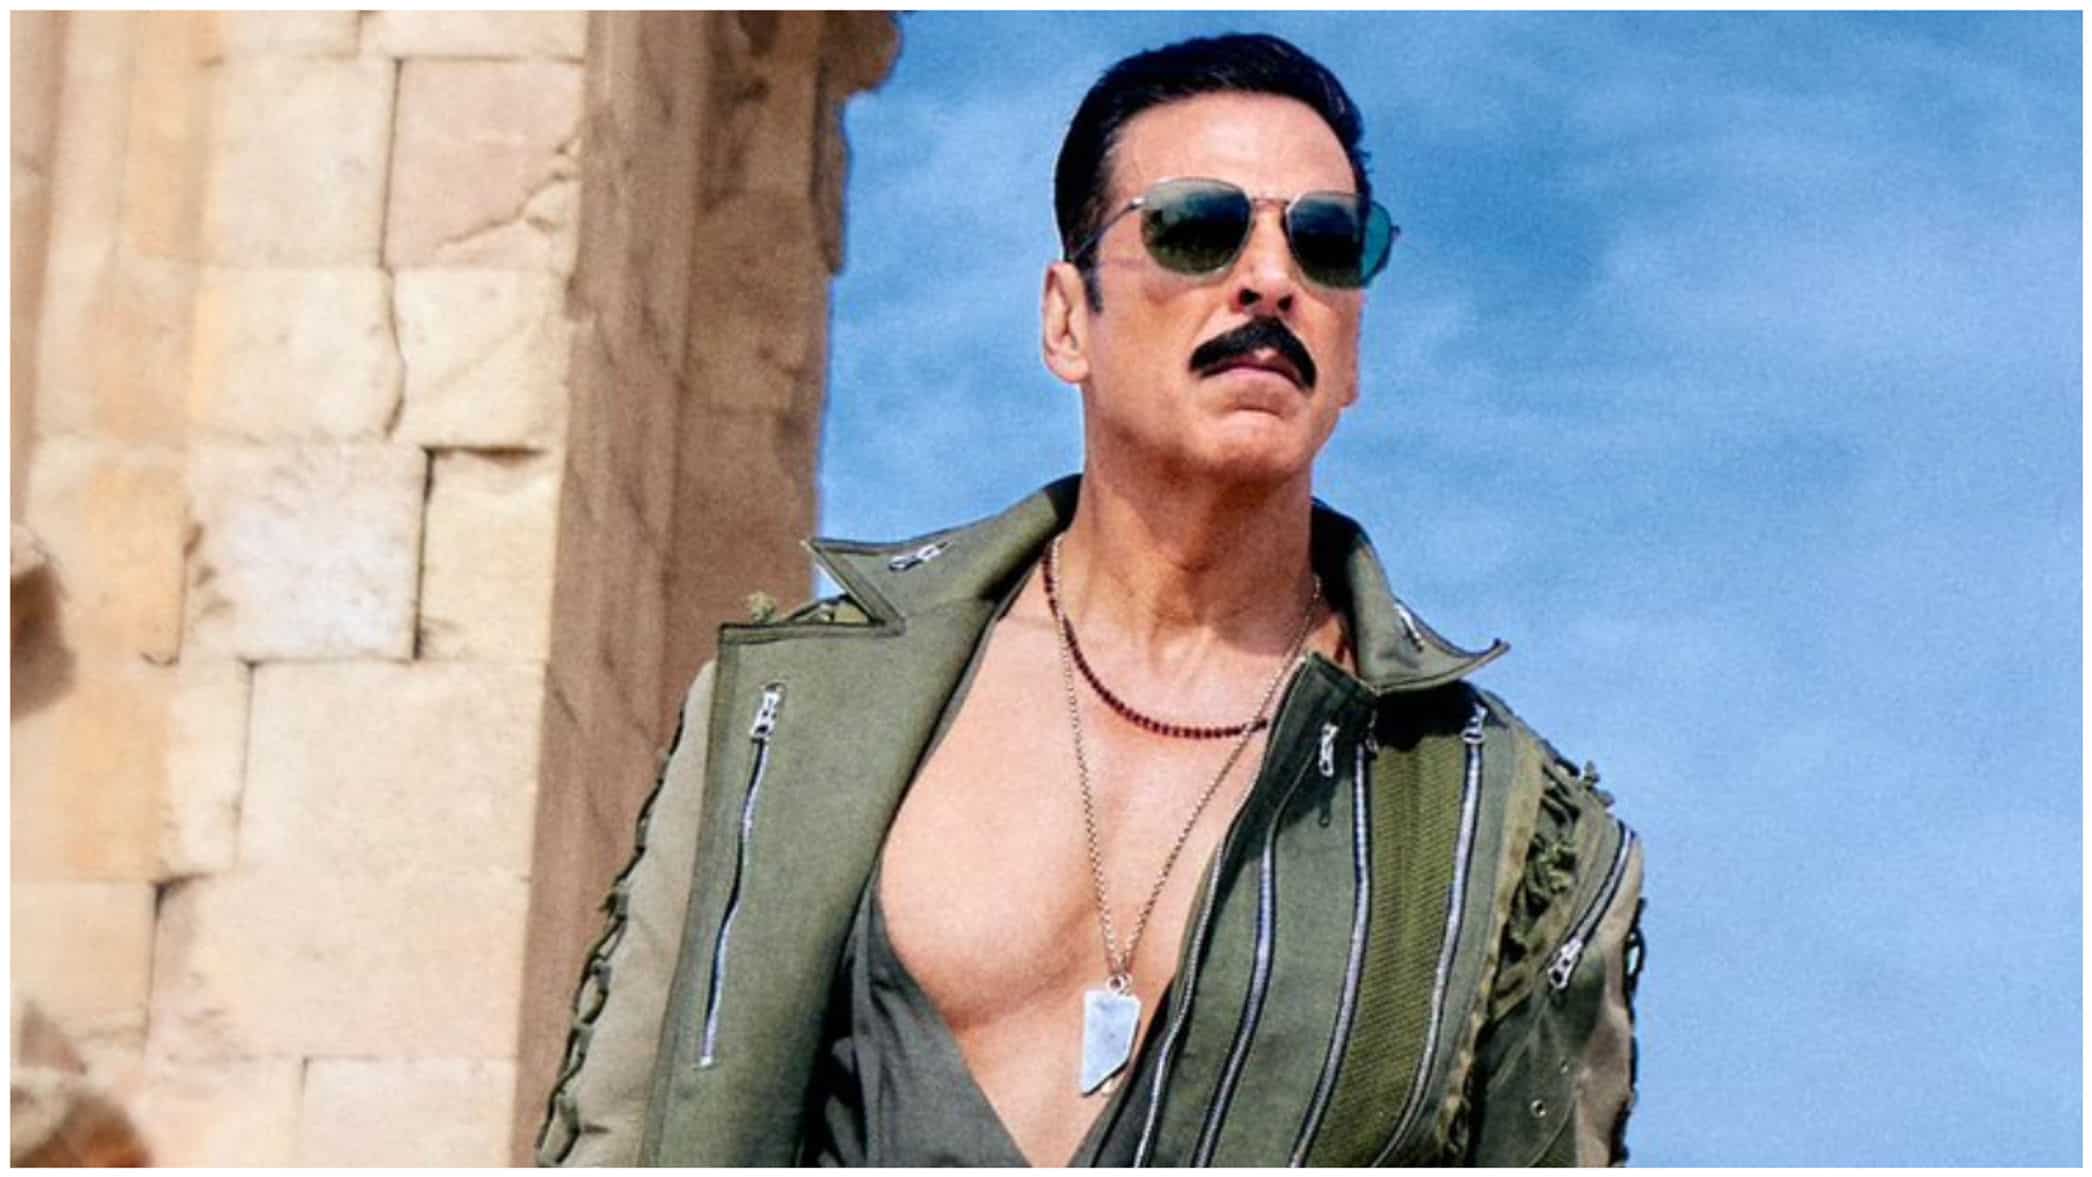 https://www.mobilemasala.com/movies/Despite-Bade-Miyan-Chote-Miyan-adding-to-his-film-failures-Akshay-Kumar-likely-to-have-as-many-as-5-more-releases-in-2024-i258203